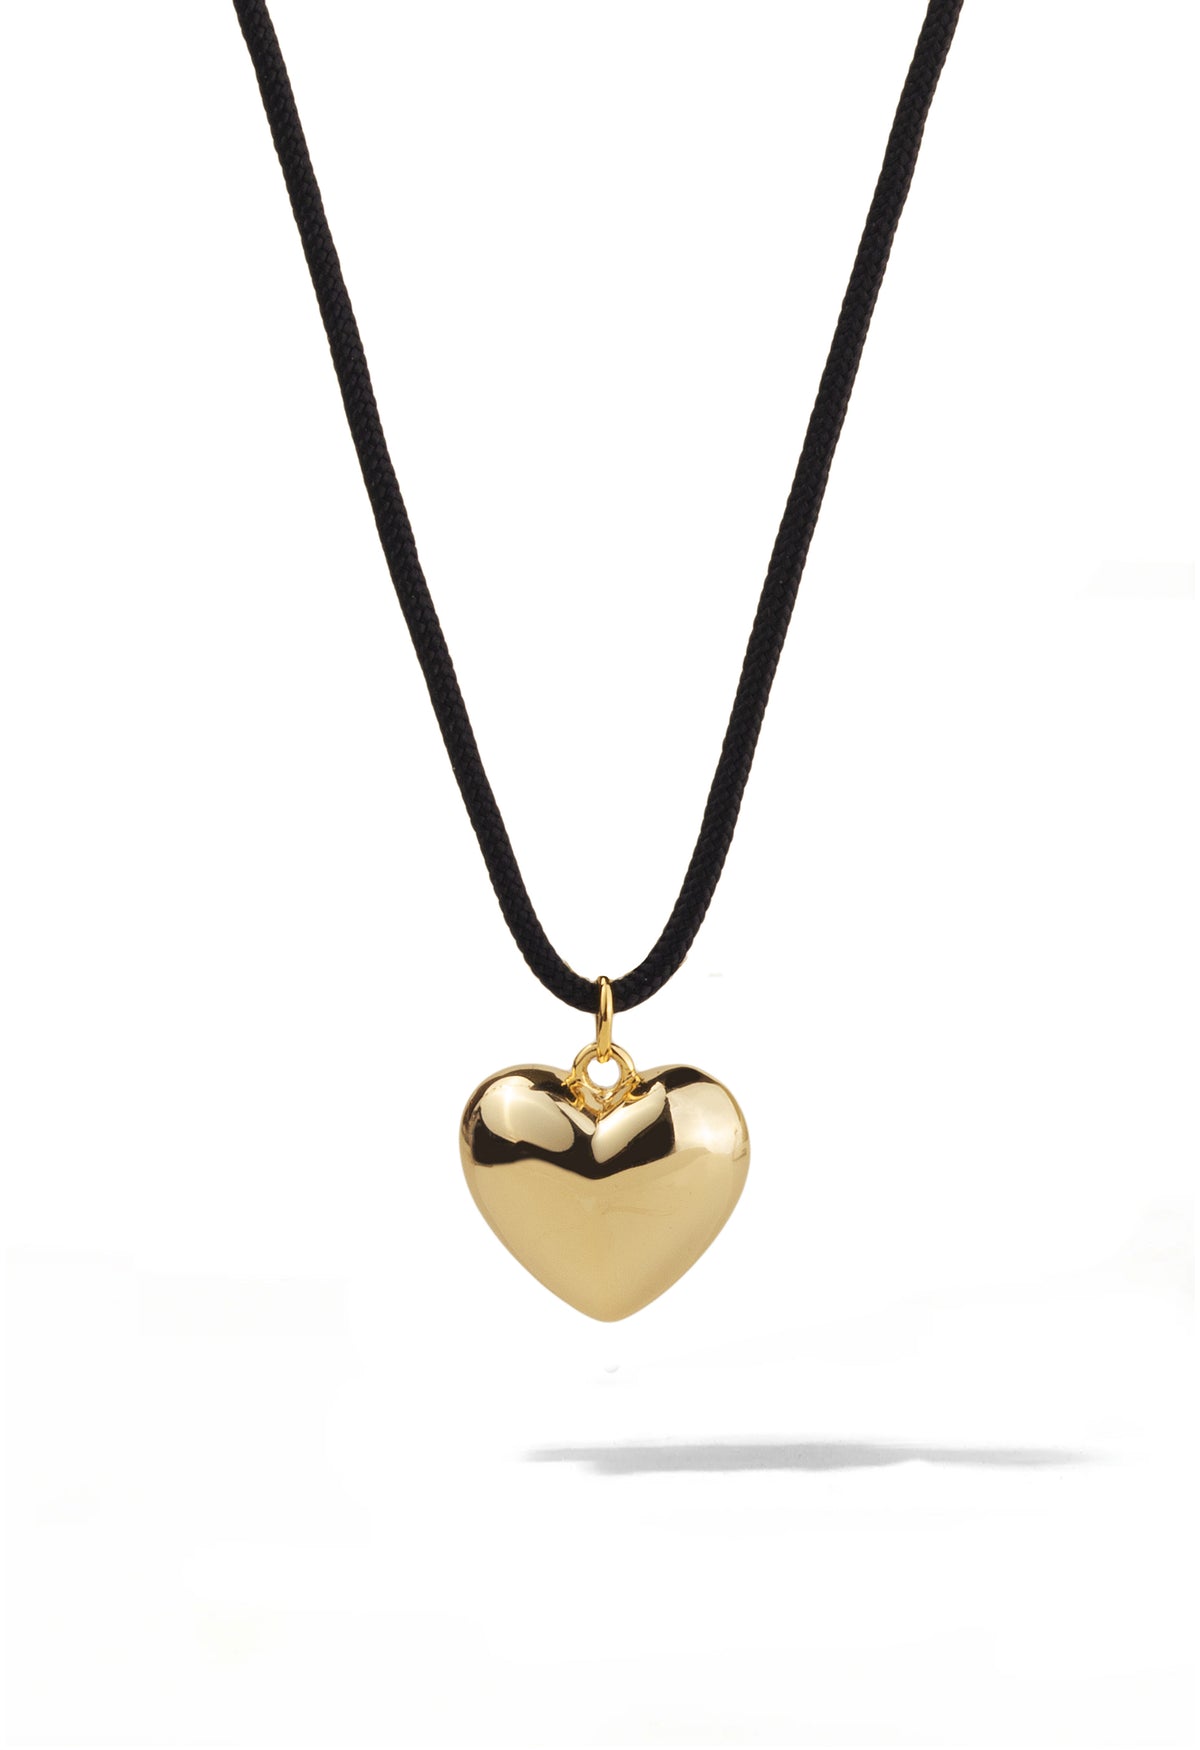 Gold Puffed Heart Cord Necklace | By Oomiay – Oomiay Jewelry